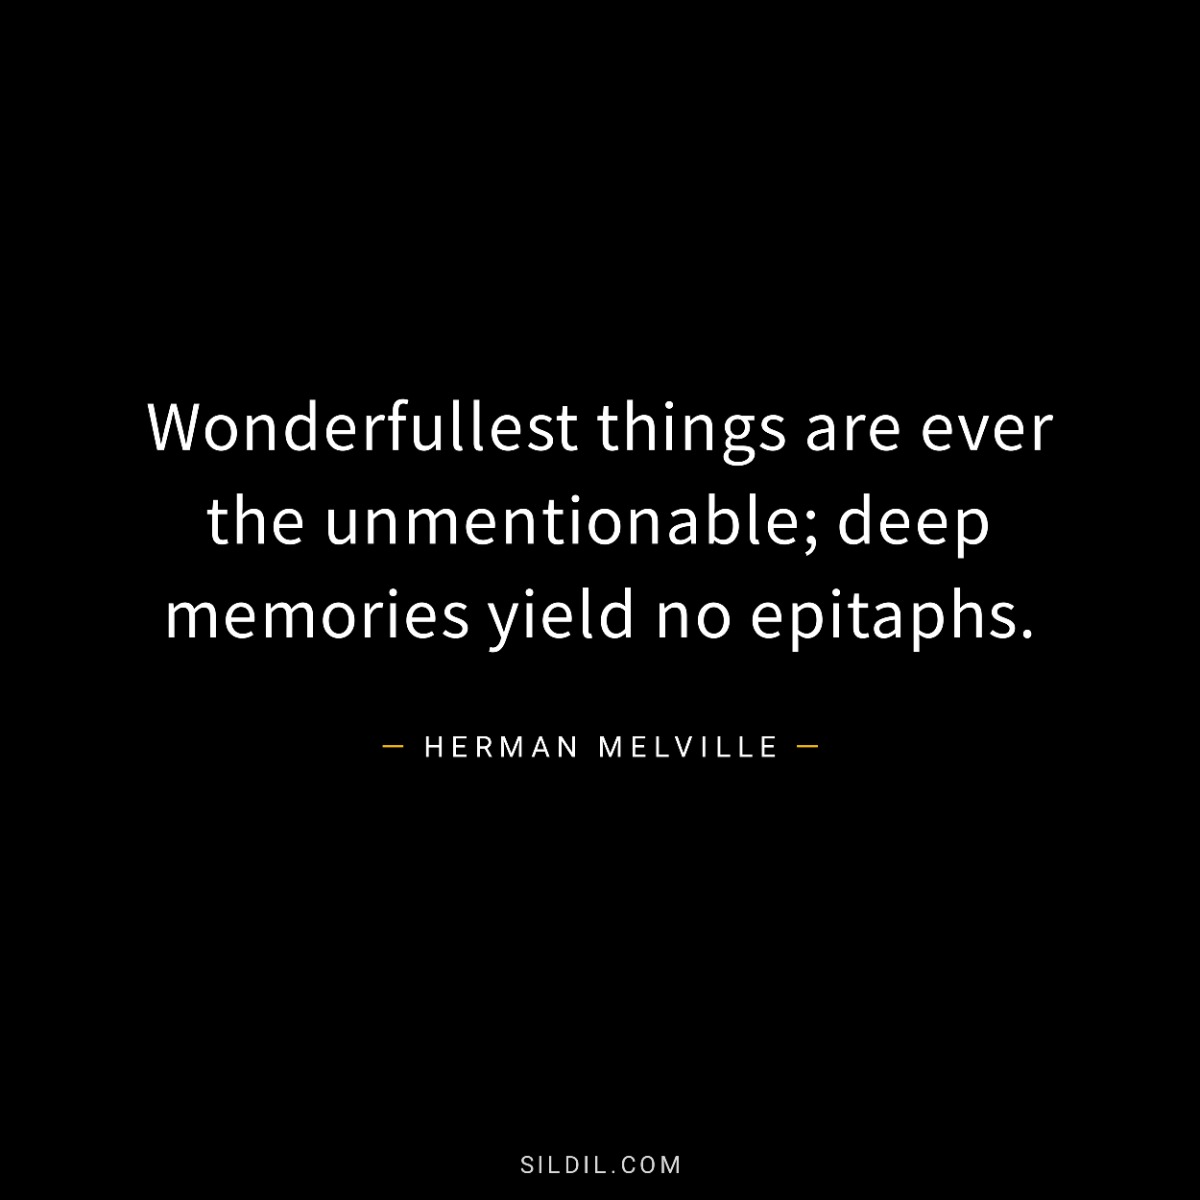 Wonderfullest things are ever the unmentionable; deep memories yield no epitaphs.